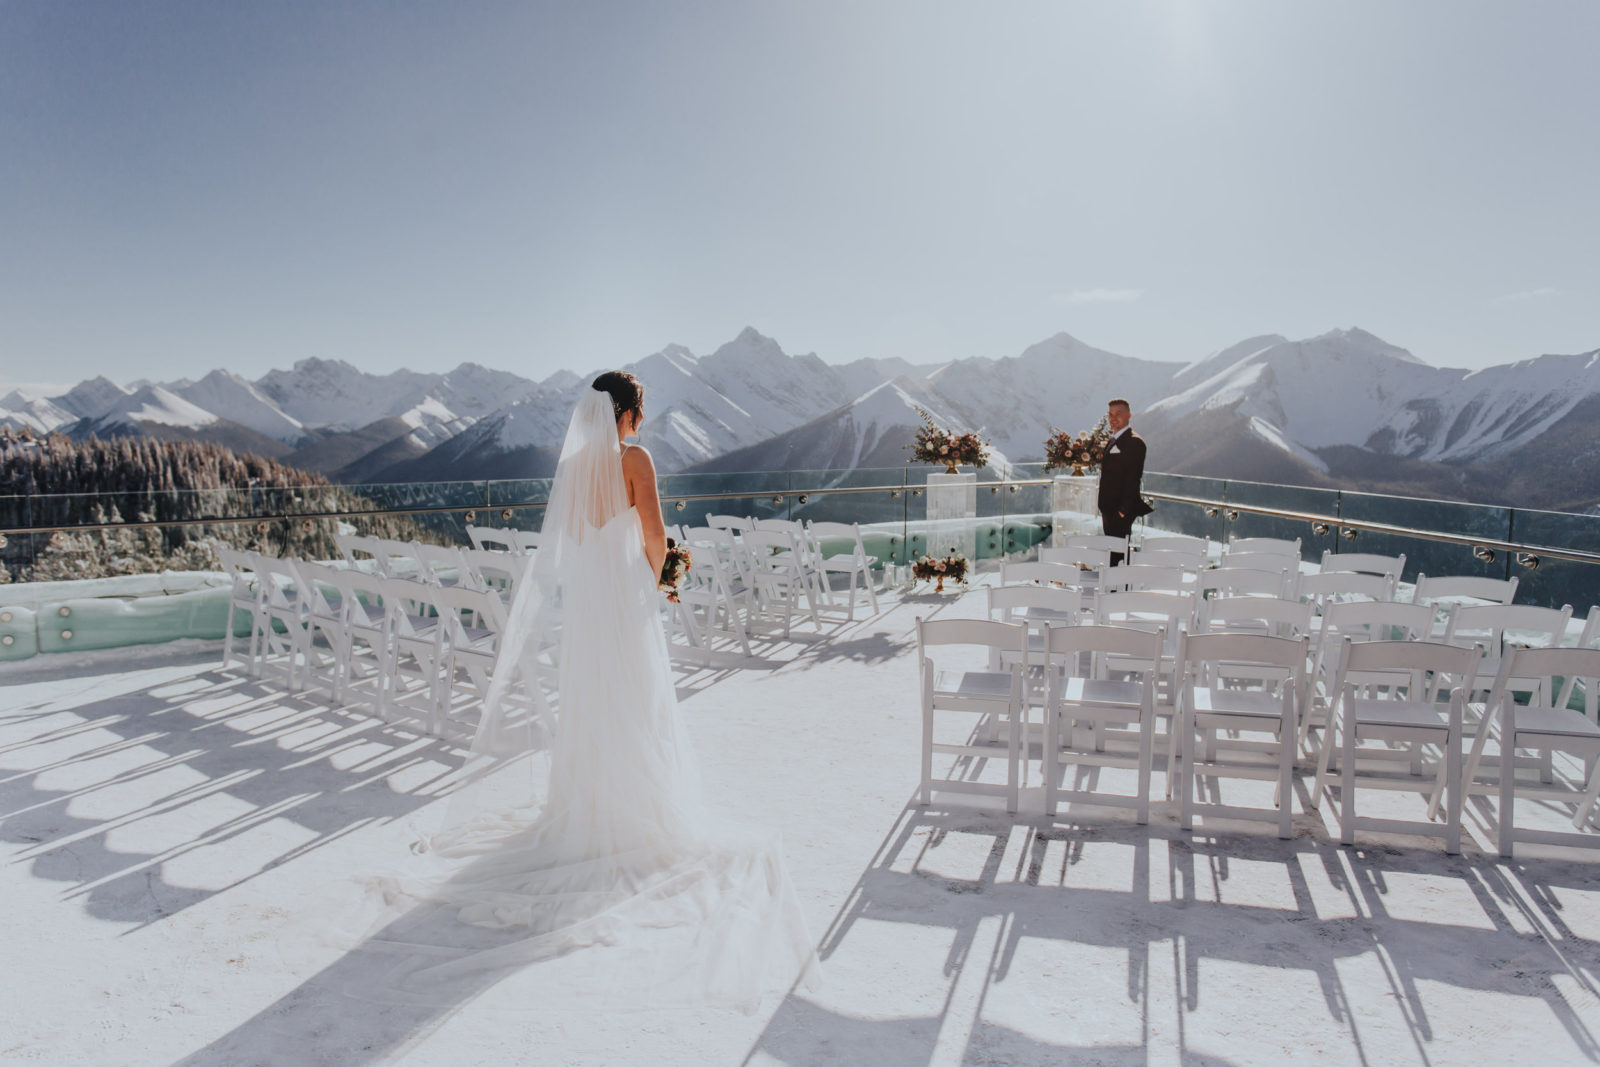 Stunning bride and groom first look, captured by Rocky Mountain Photo Co.